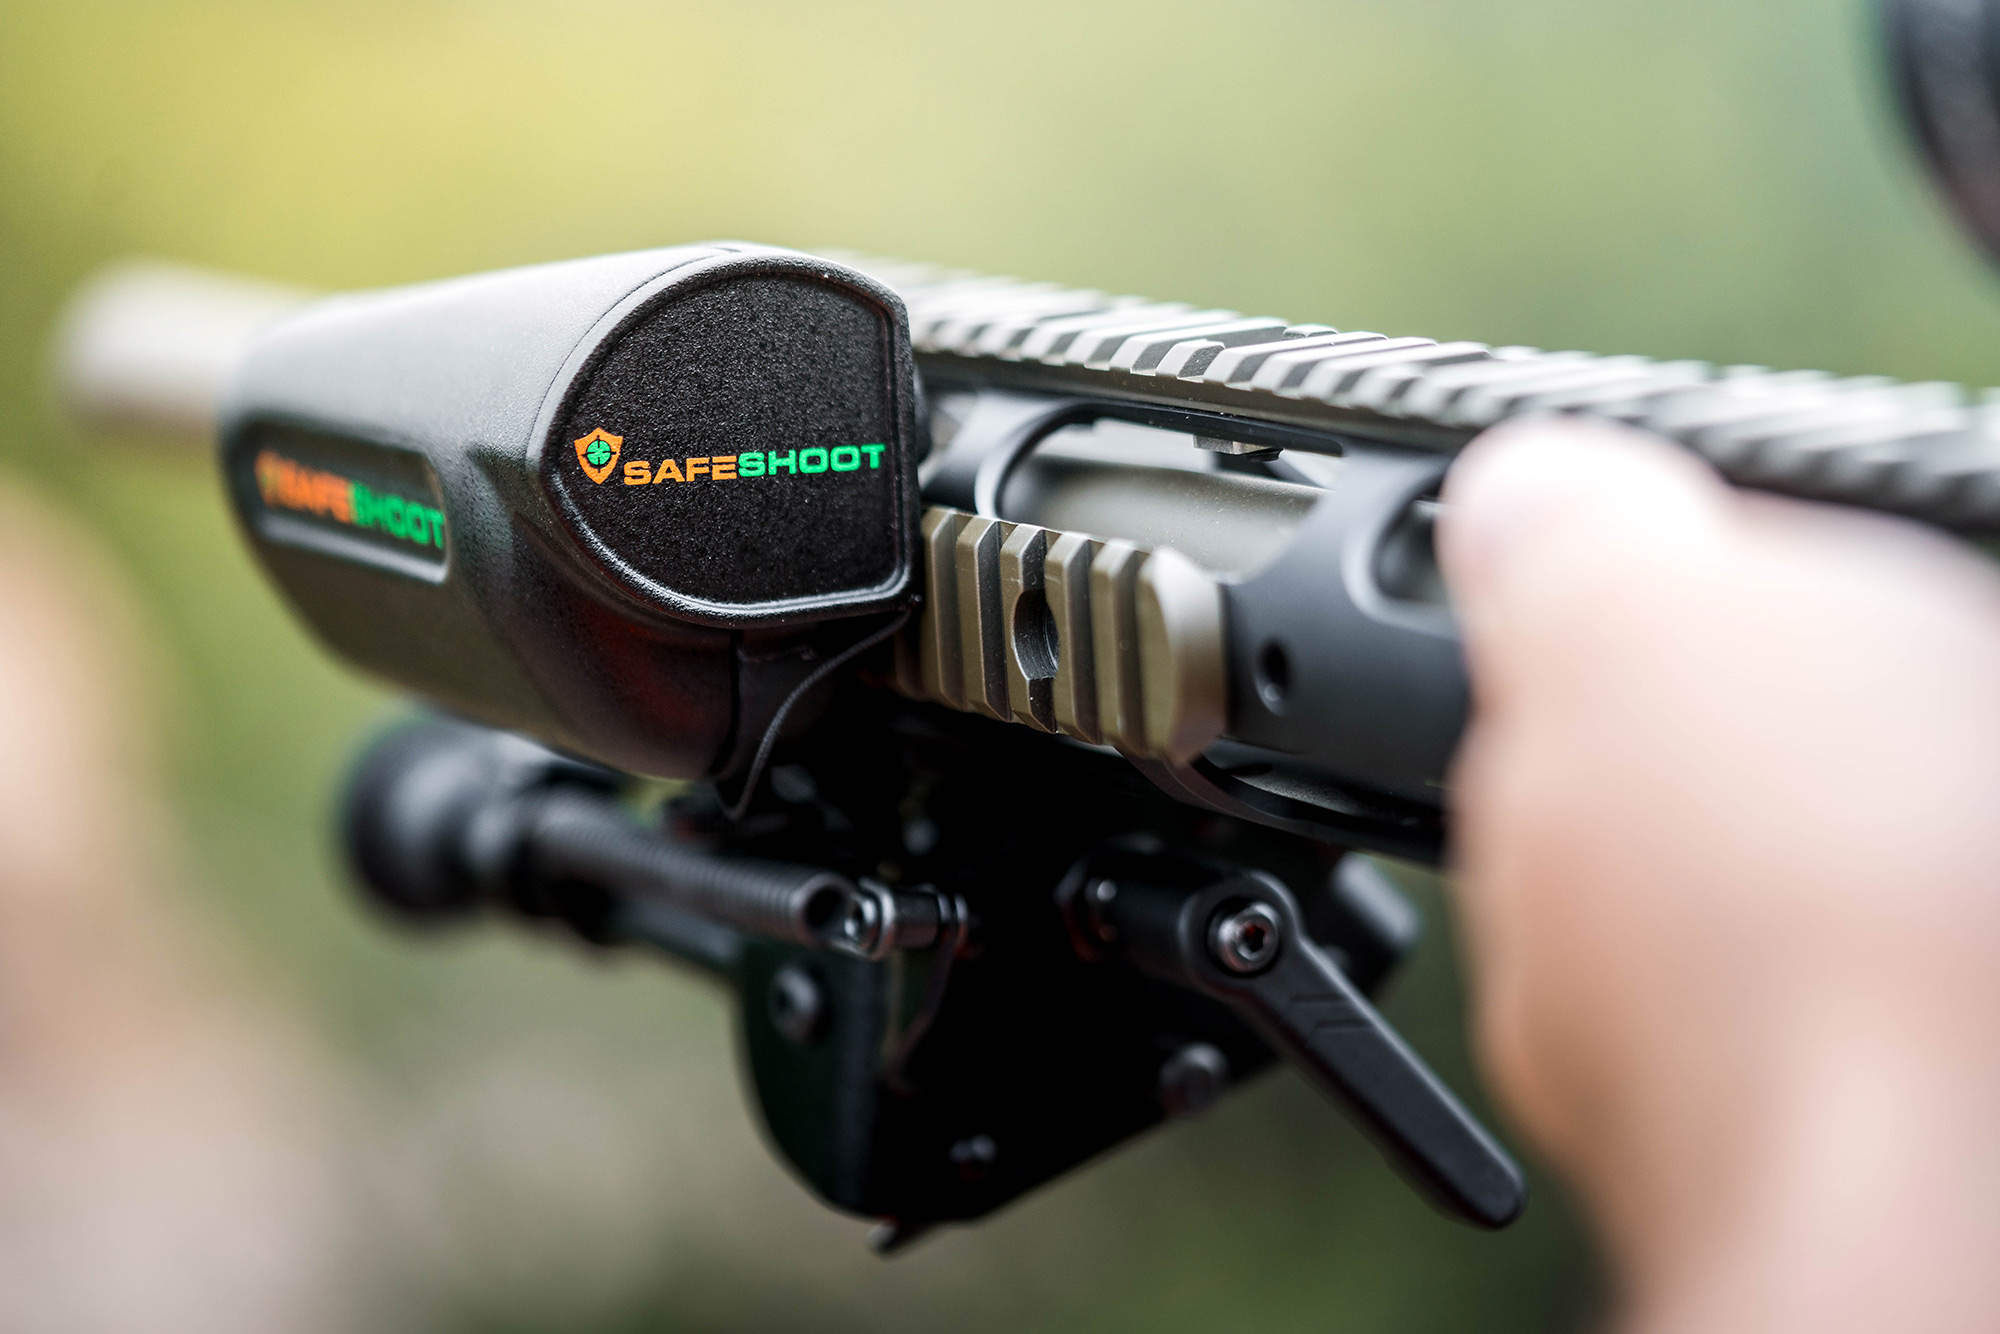 SafeShoot Device attached to a rifle